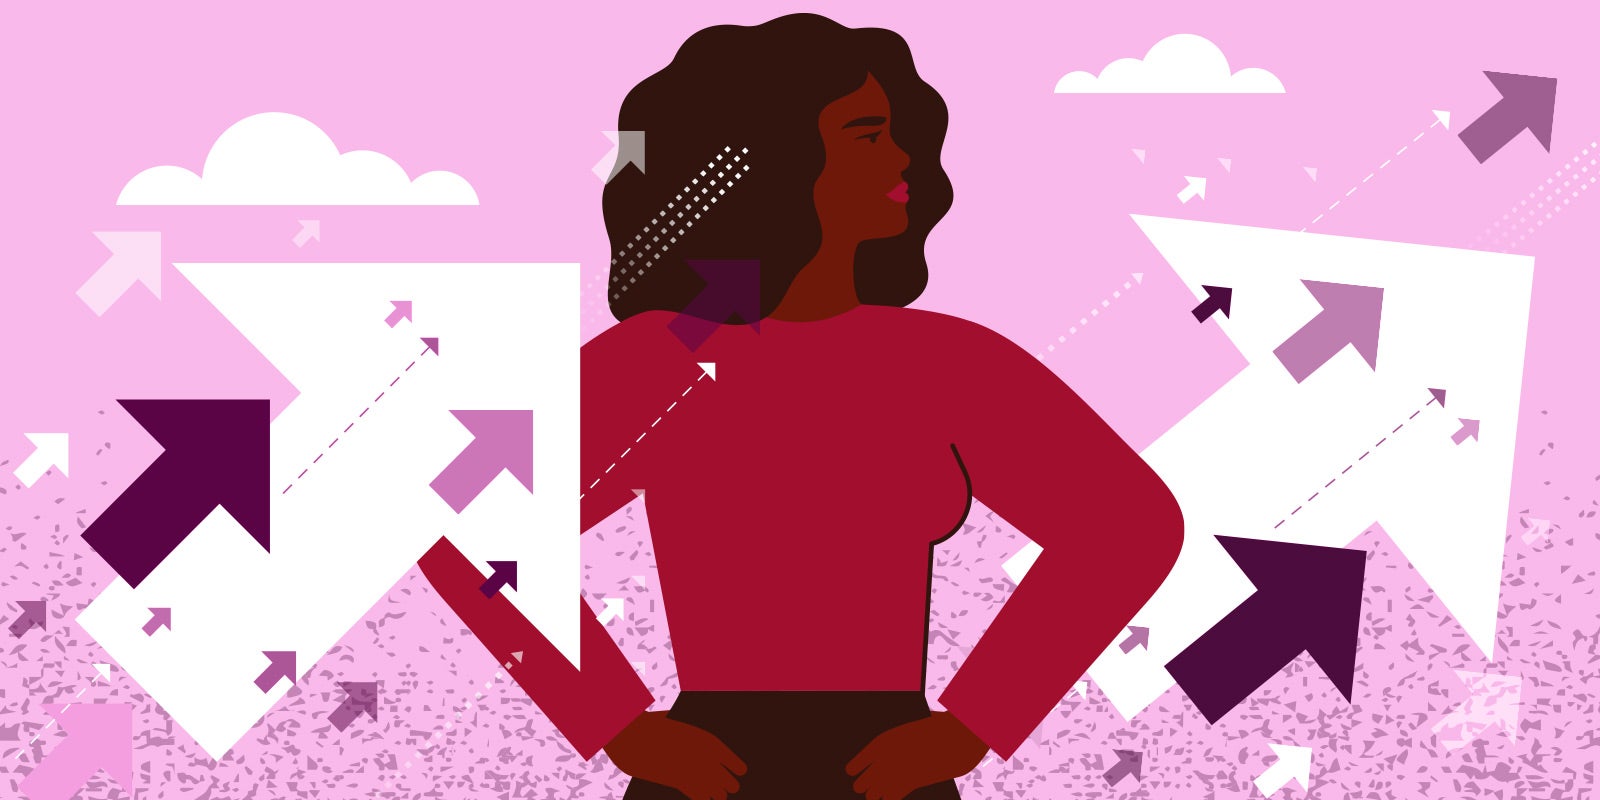 illustration of a diverse woman leader who is a candidate in the young executives competition with her hands on her hips and arrows in the background pointing upward to show she is growing in her career